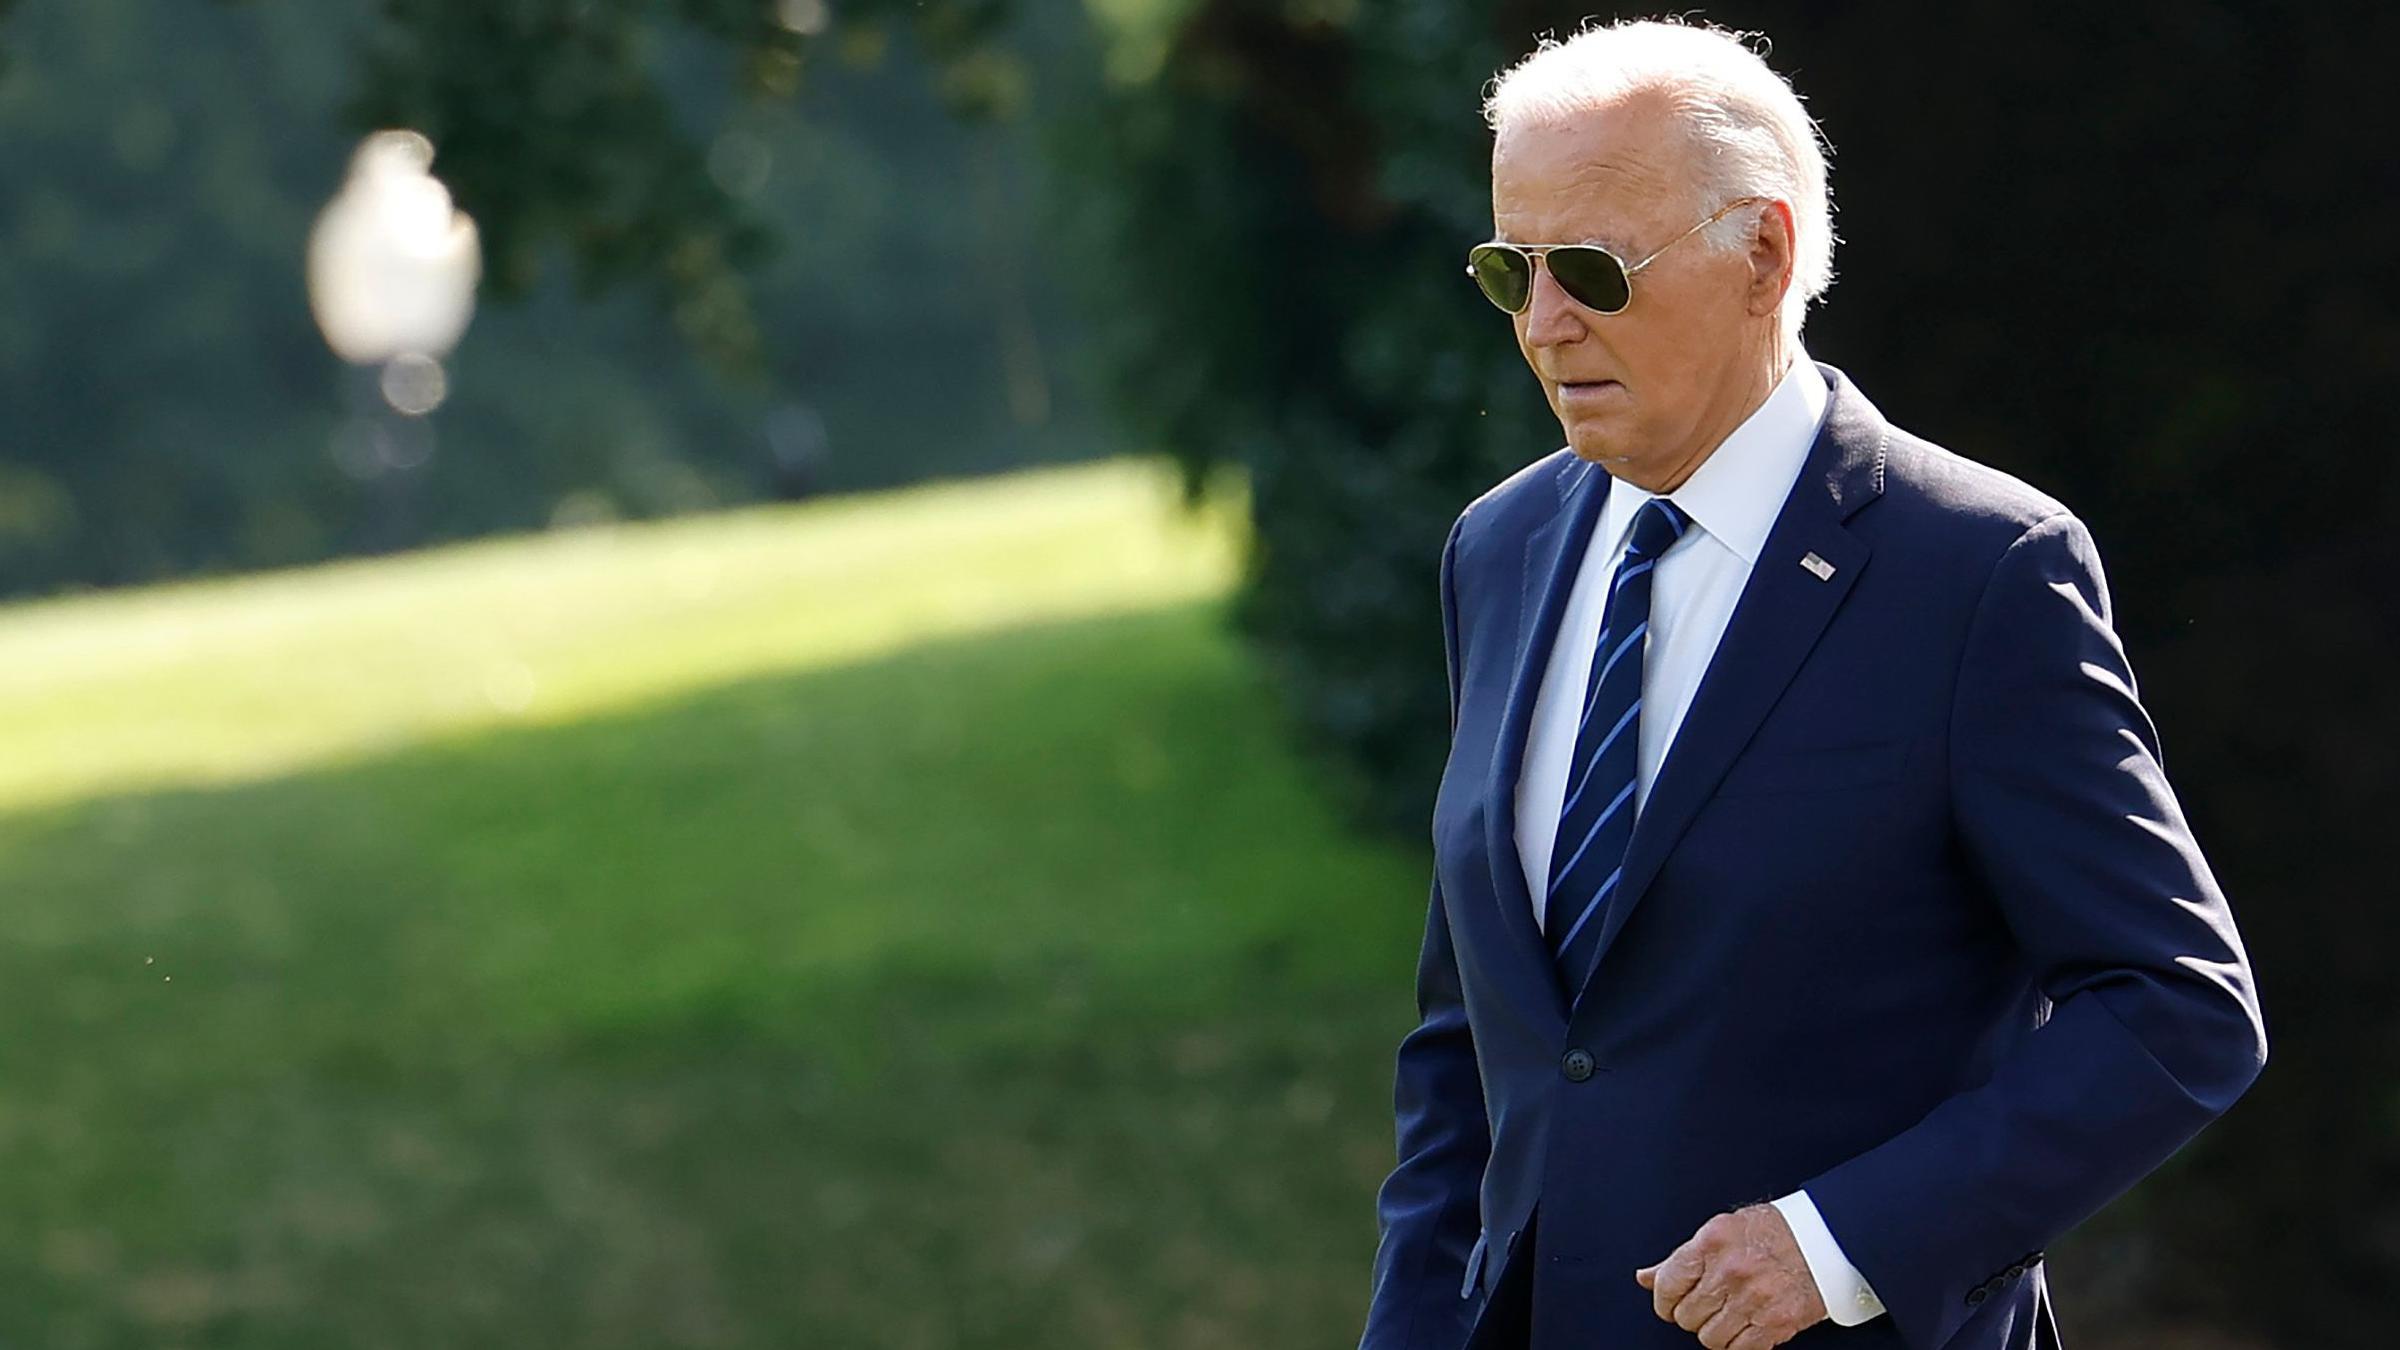 Isolating at his beach house, Biden took his momentous decision alone